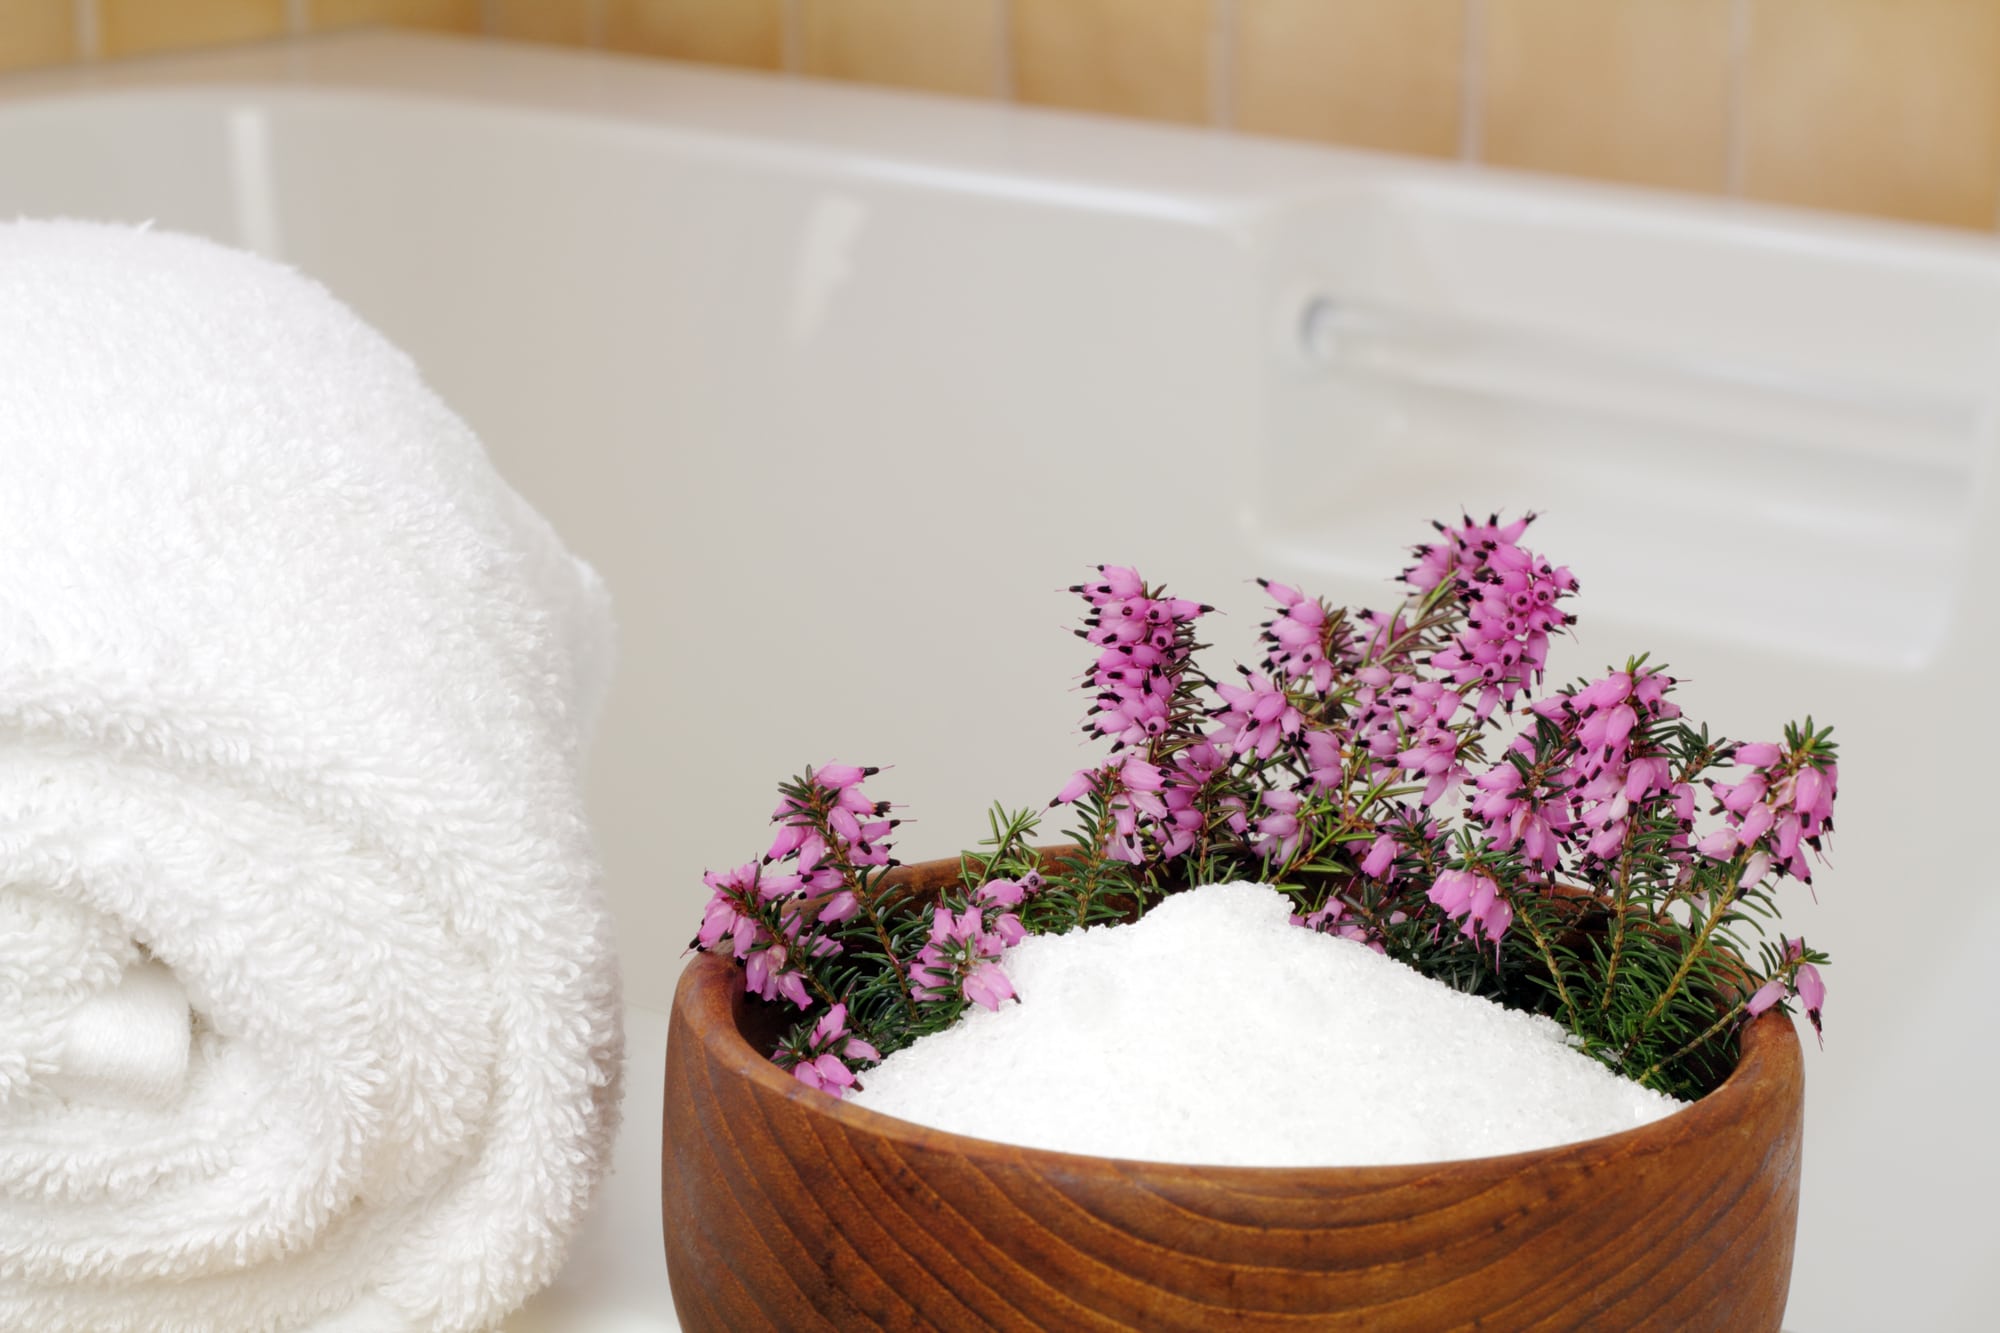 Can You Use Epsom Salt in A Hot Tub?